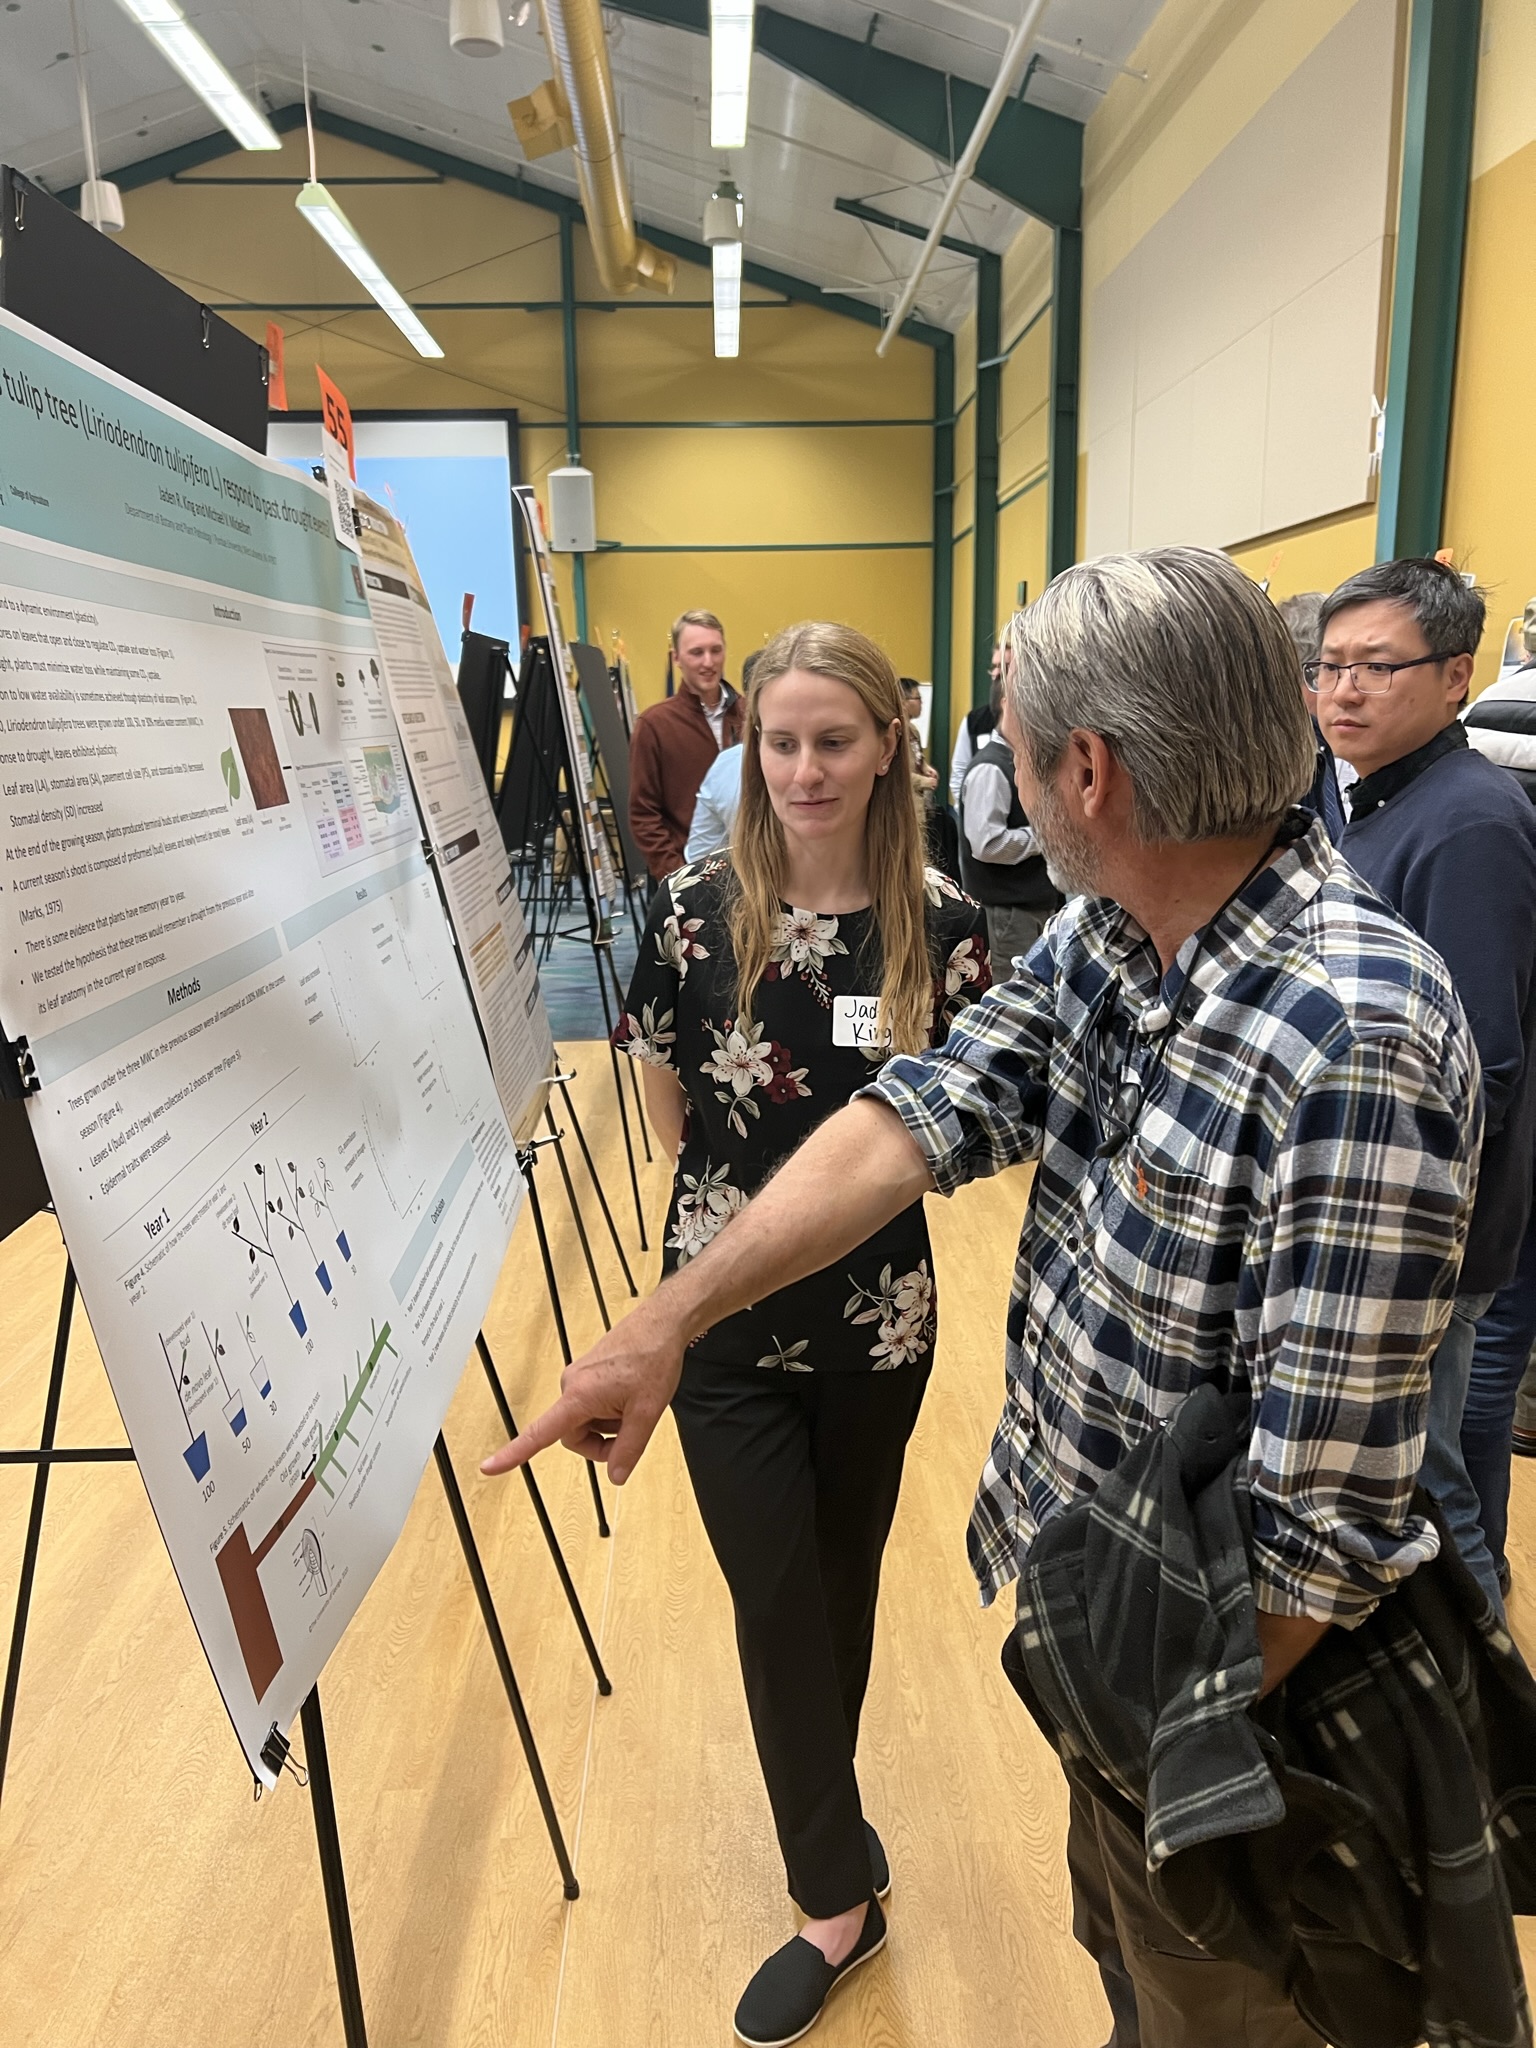 individuals looking at research poster